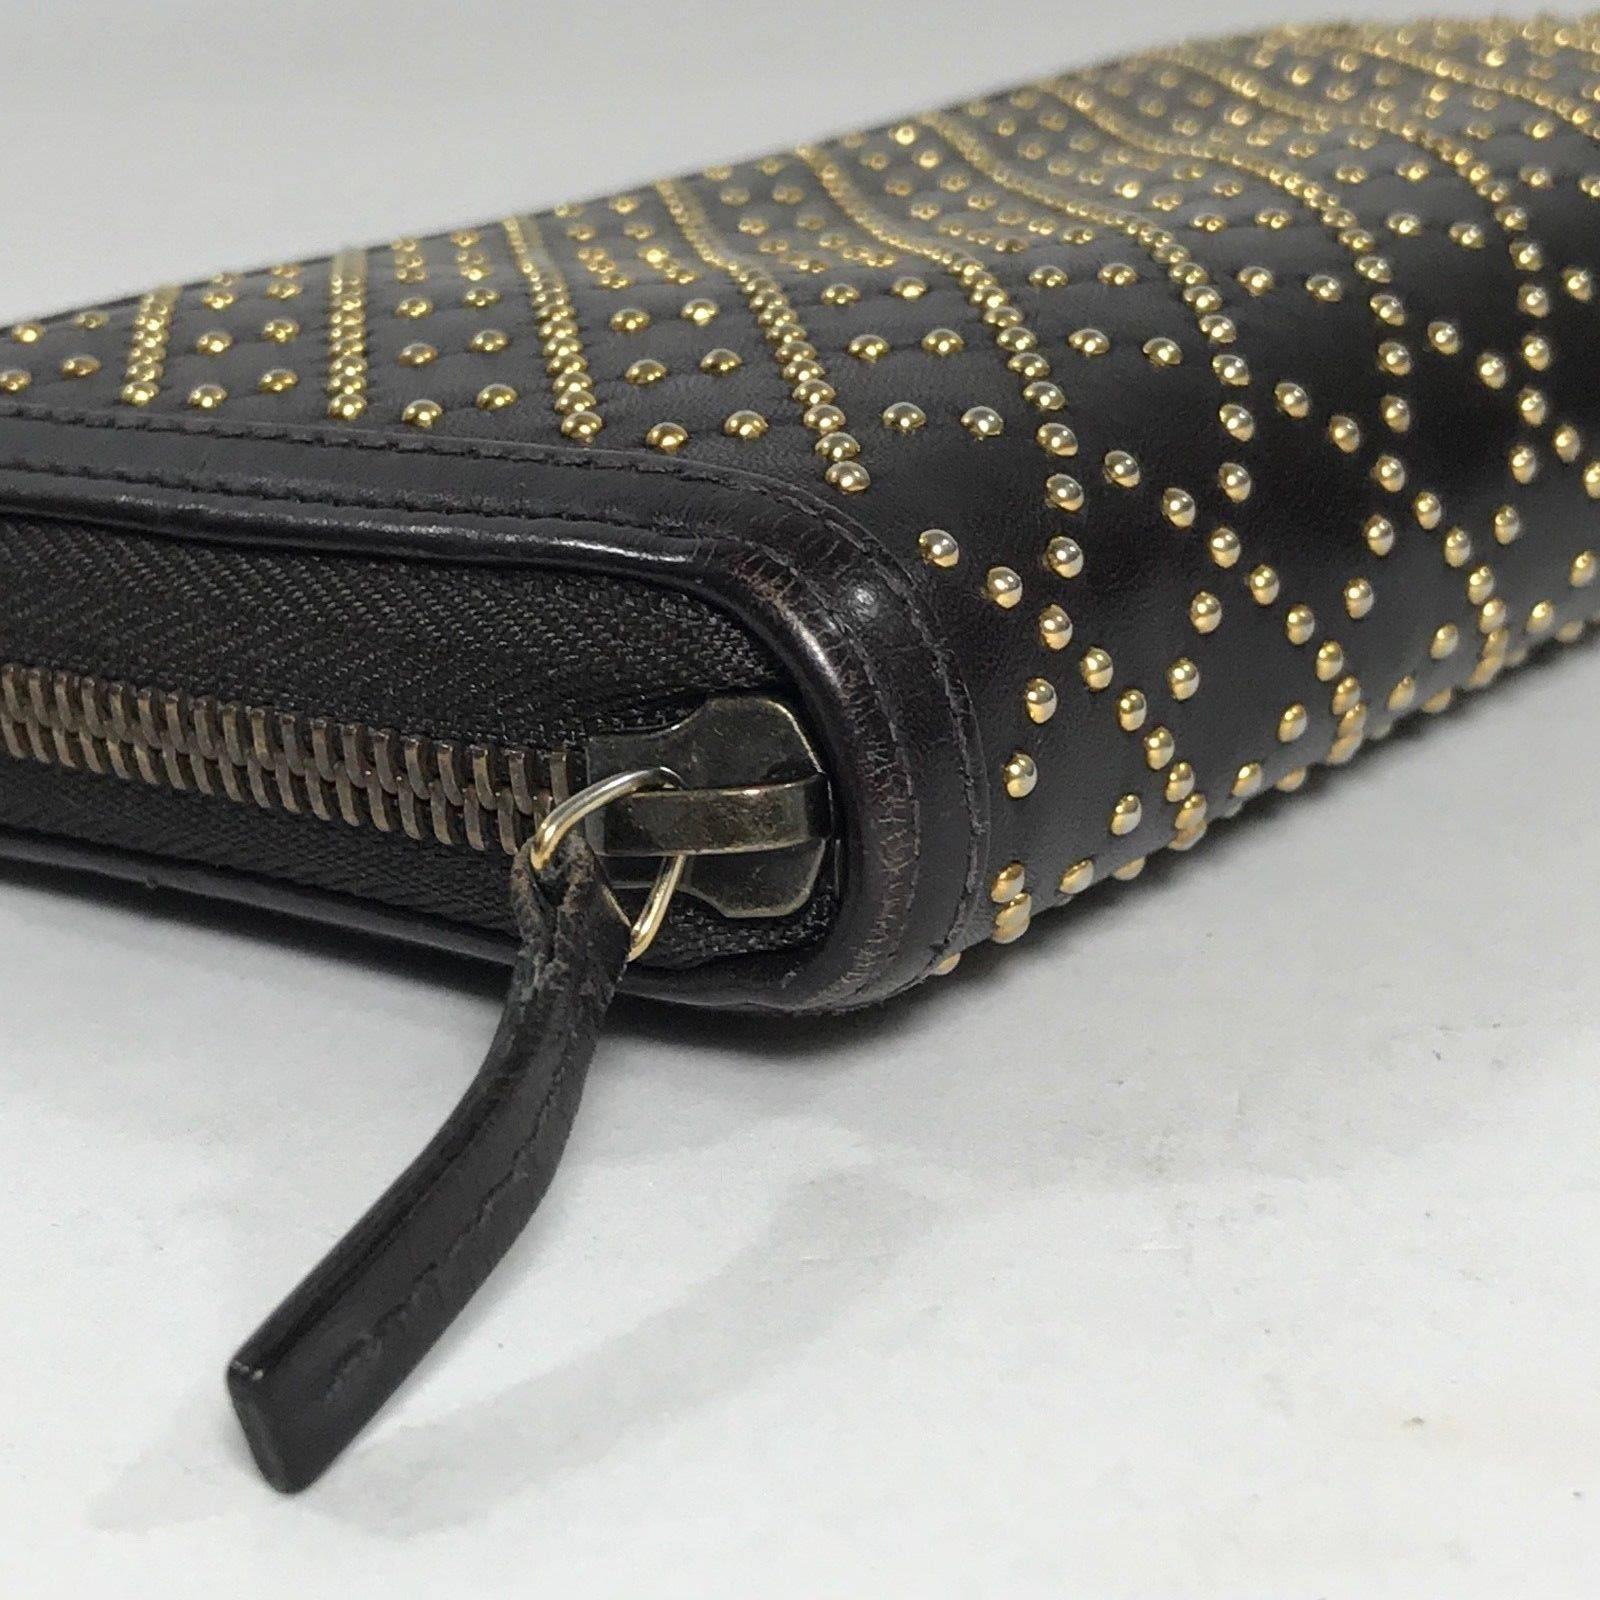 Gucci Diamante Studded Zippy Wallet In Excellent Condition For Sale In Saint Charles, IL